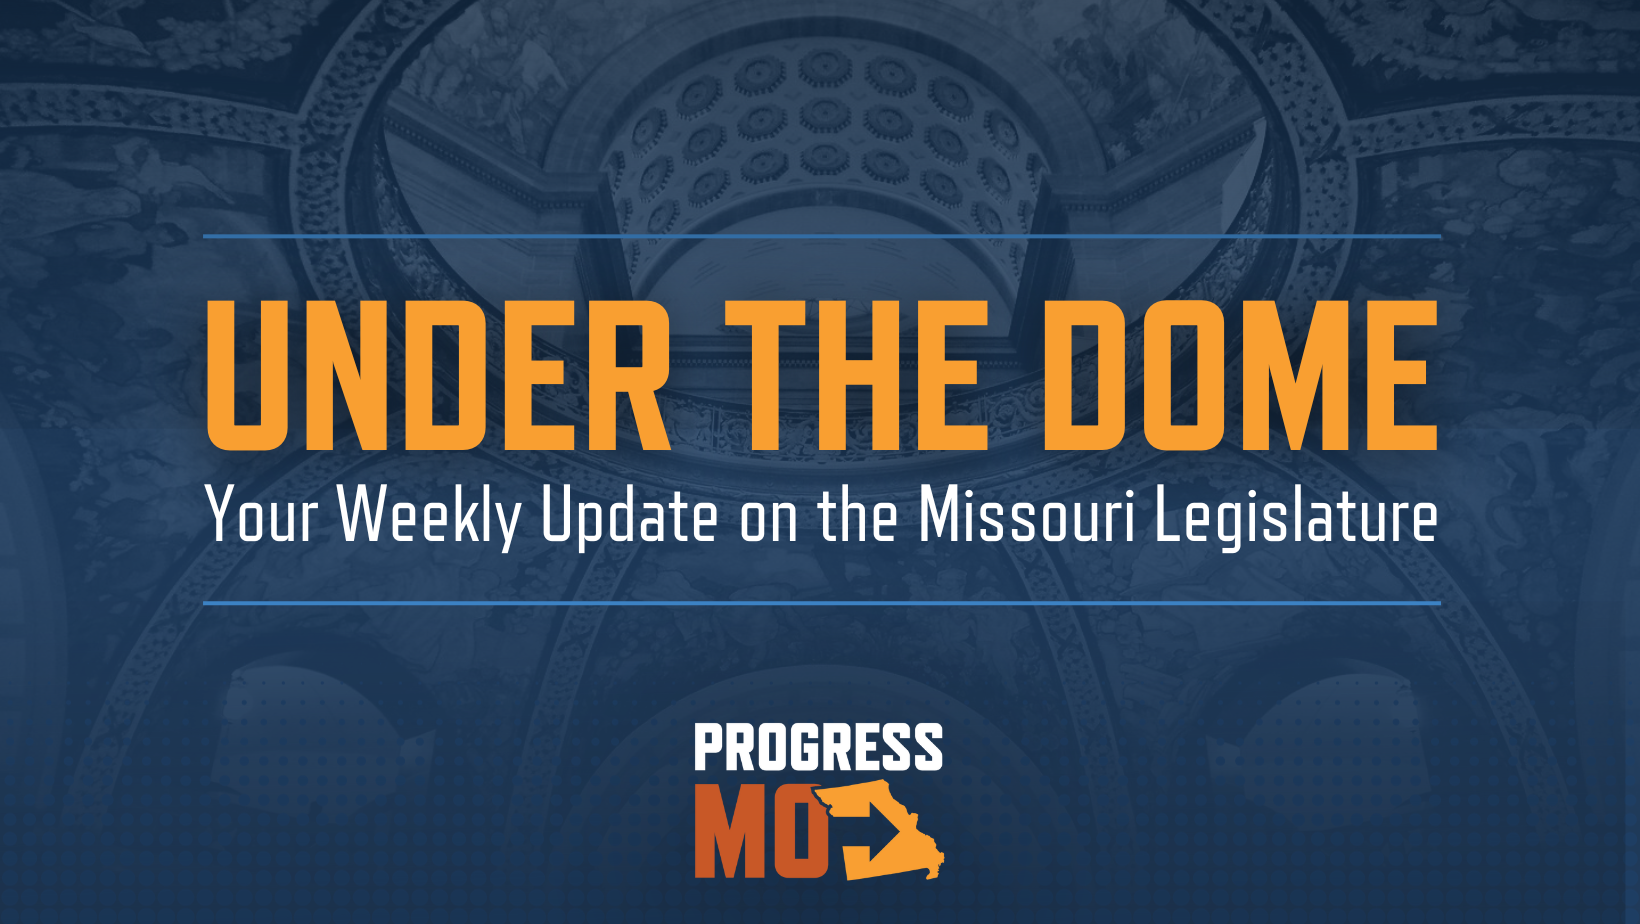 Graphic text: Under the dome: your weekly update on the Missouri Legislature